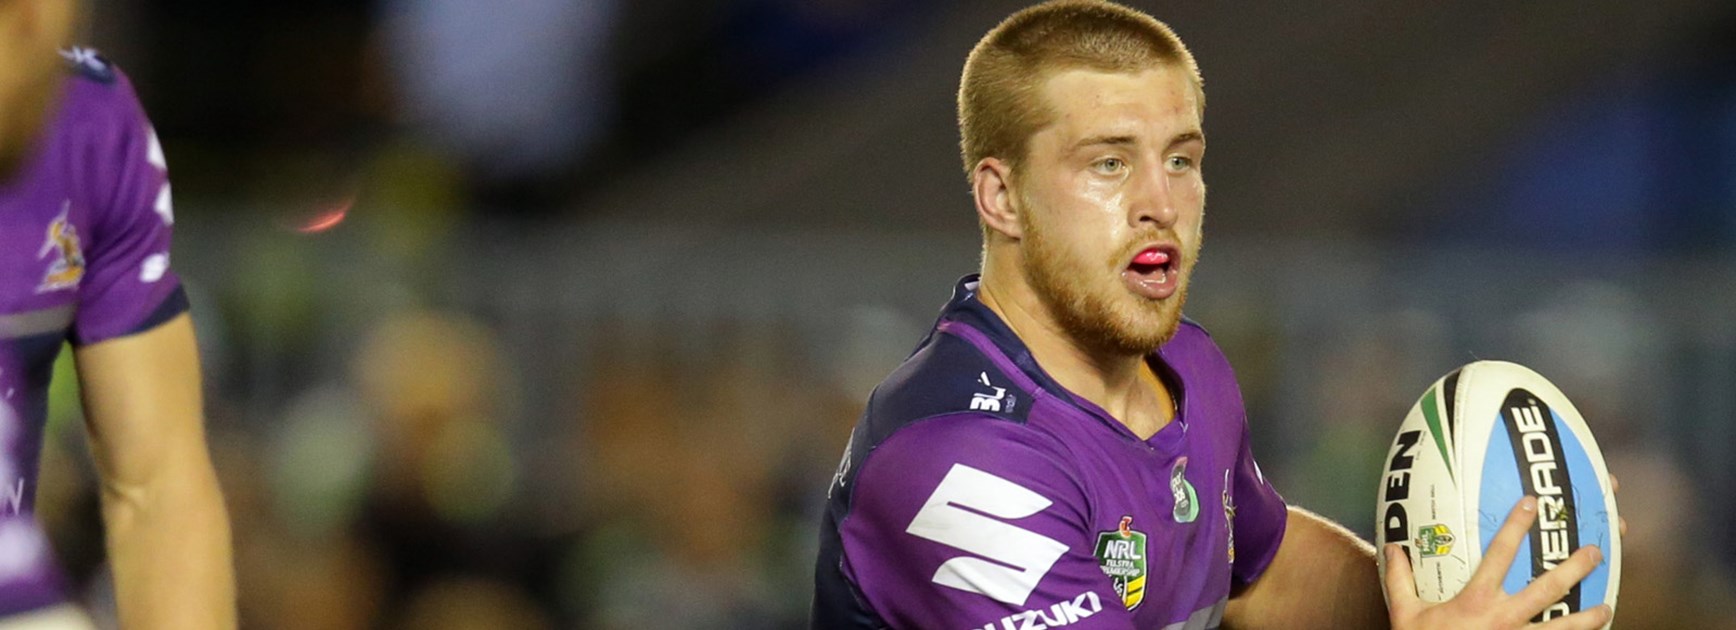 <b>6. Cameron Munster</b> - Filling in at fullback for injured Storm great Billy Slater, Munster averaged more than 177 metres from his 19 games and had greats of the game singing his praises from the commentary box. 